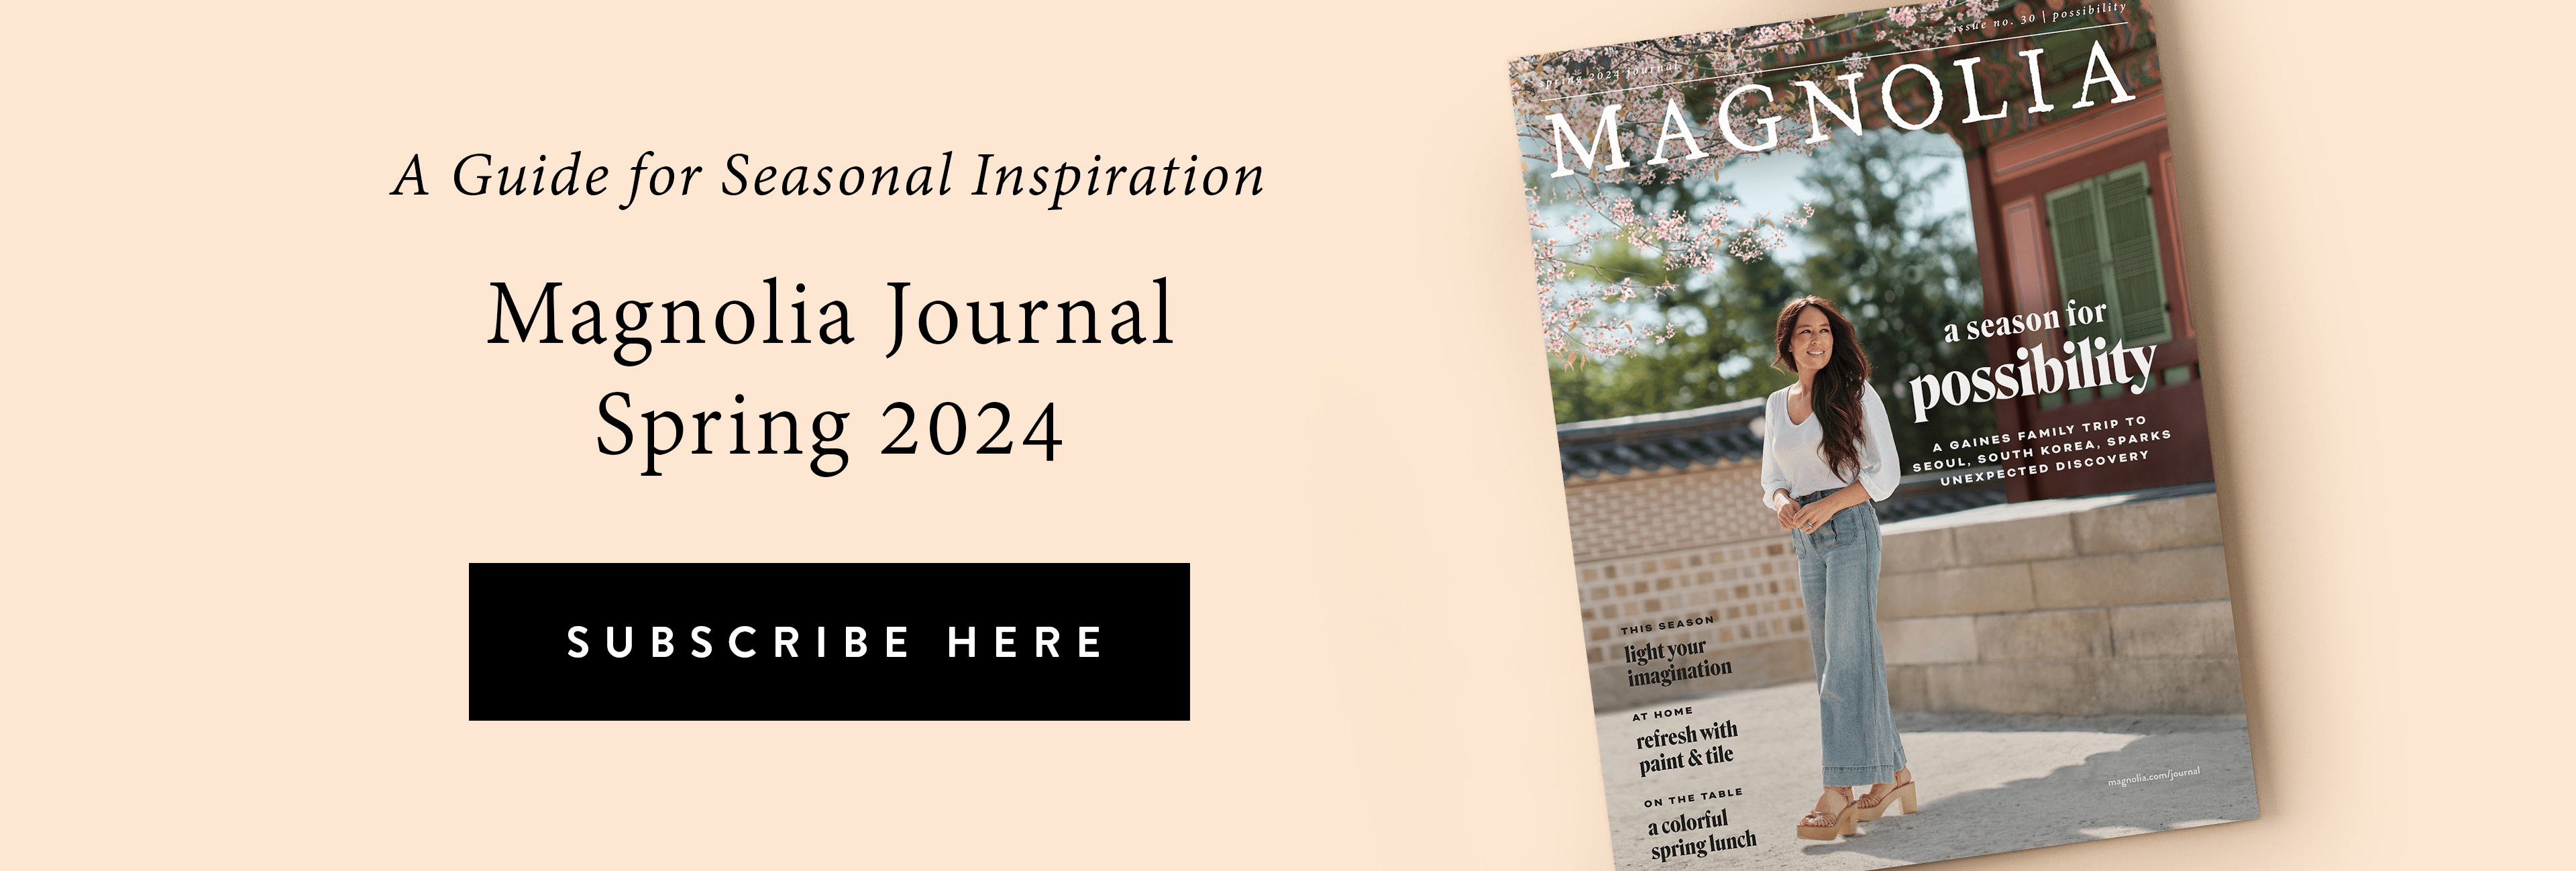 A Guide for Seasonal Inspiration - Magnolia Journal Spring 2024. Subscribe Here